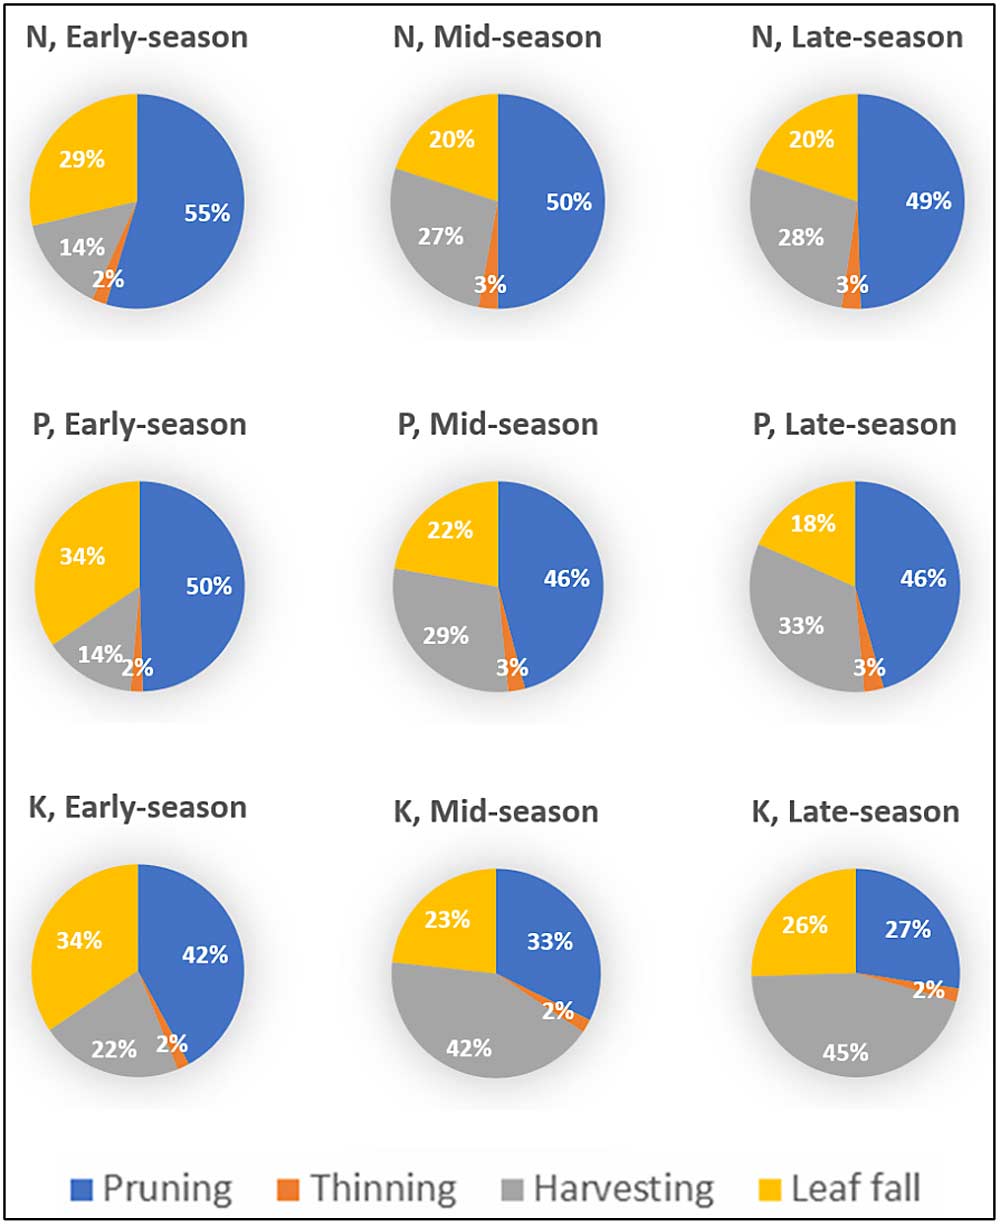 Figure 2: Nutrient partitioned to each event in different ripening season peach trees. (Courtesy Qi Zhou and Juan Carlos Melgar)